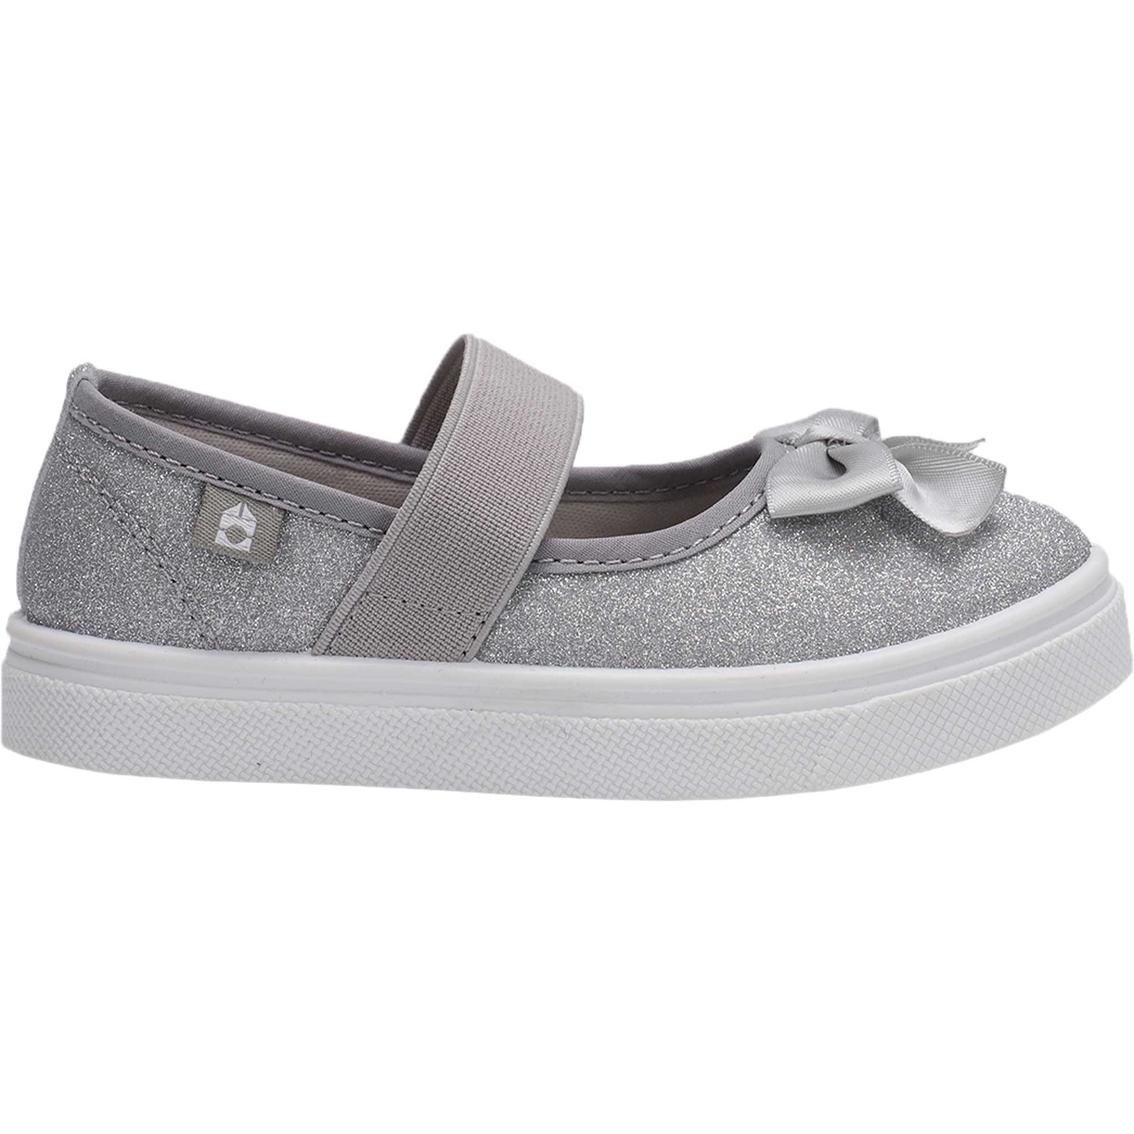 Oomphies Toddler Girls Quinn Mary Jane Sneakers - Image 2 of 4